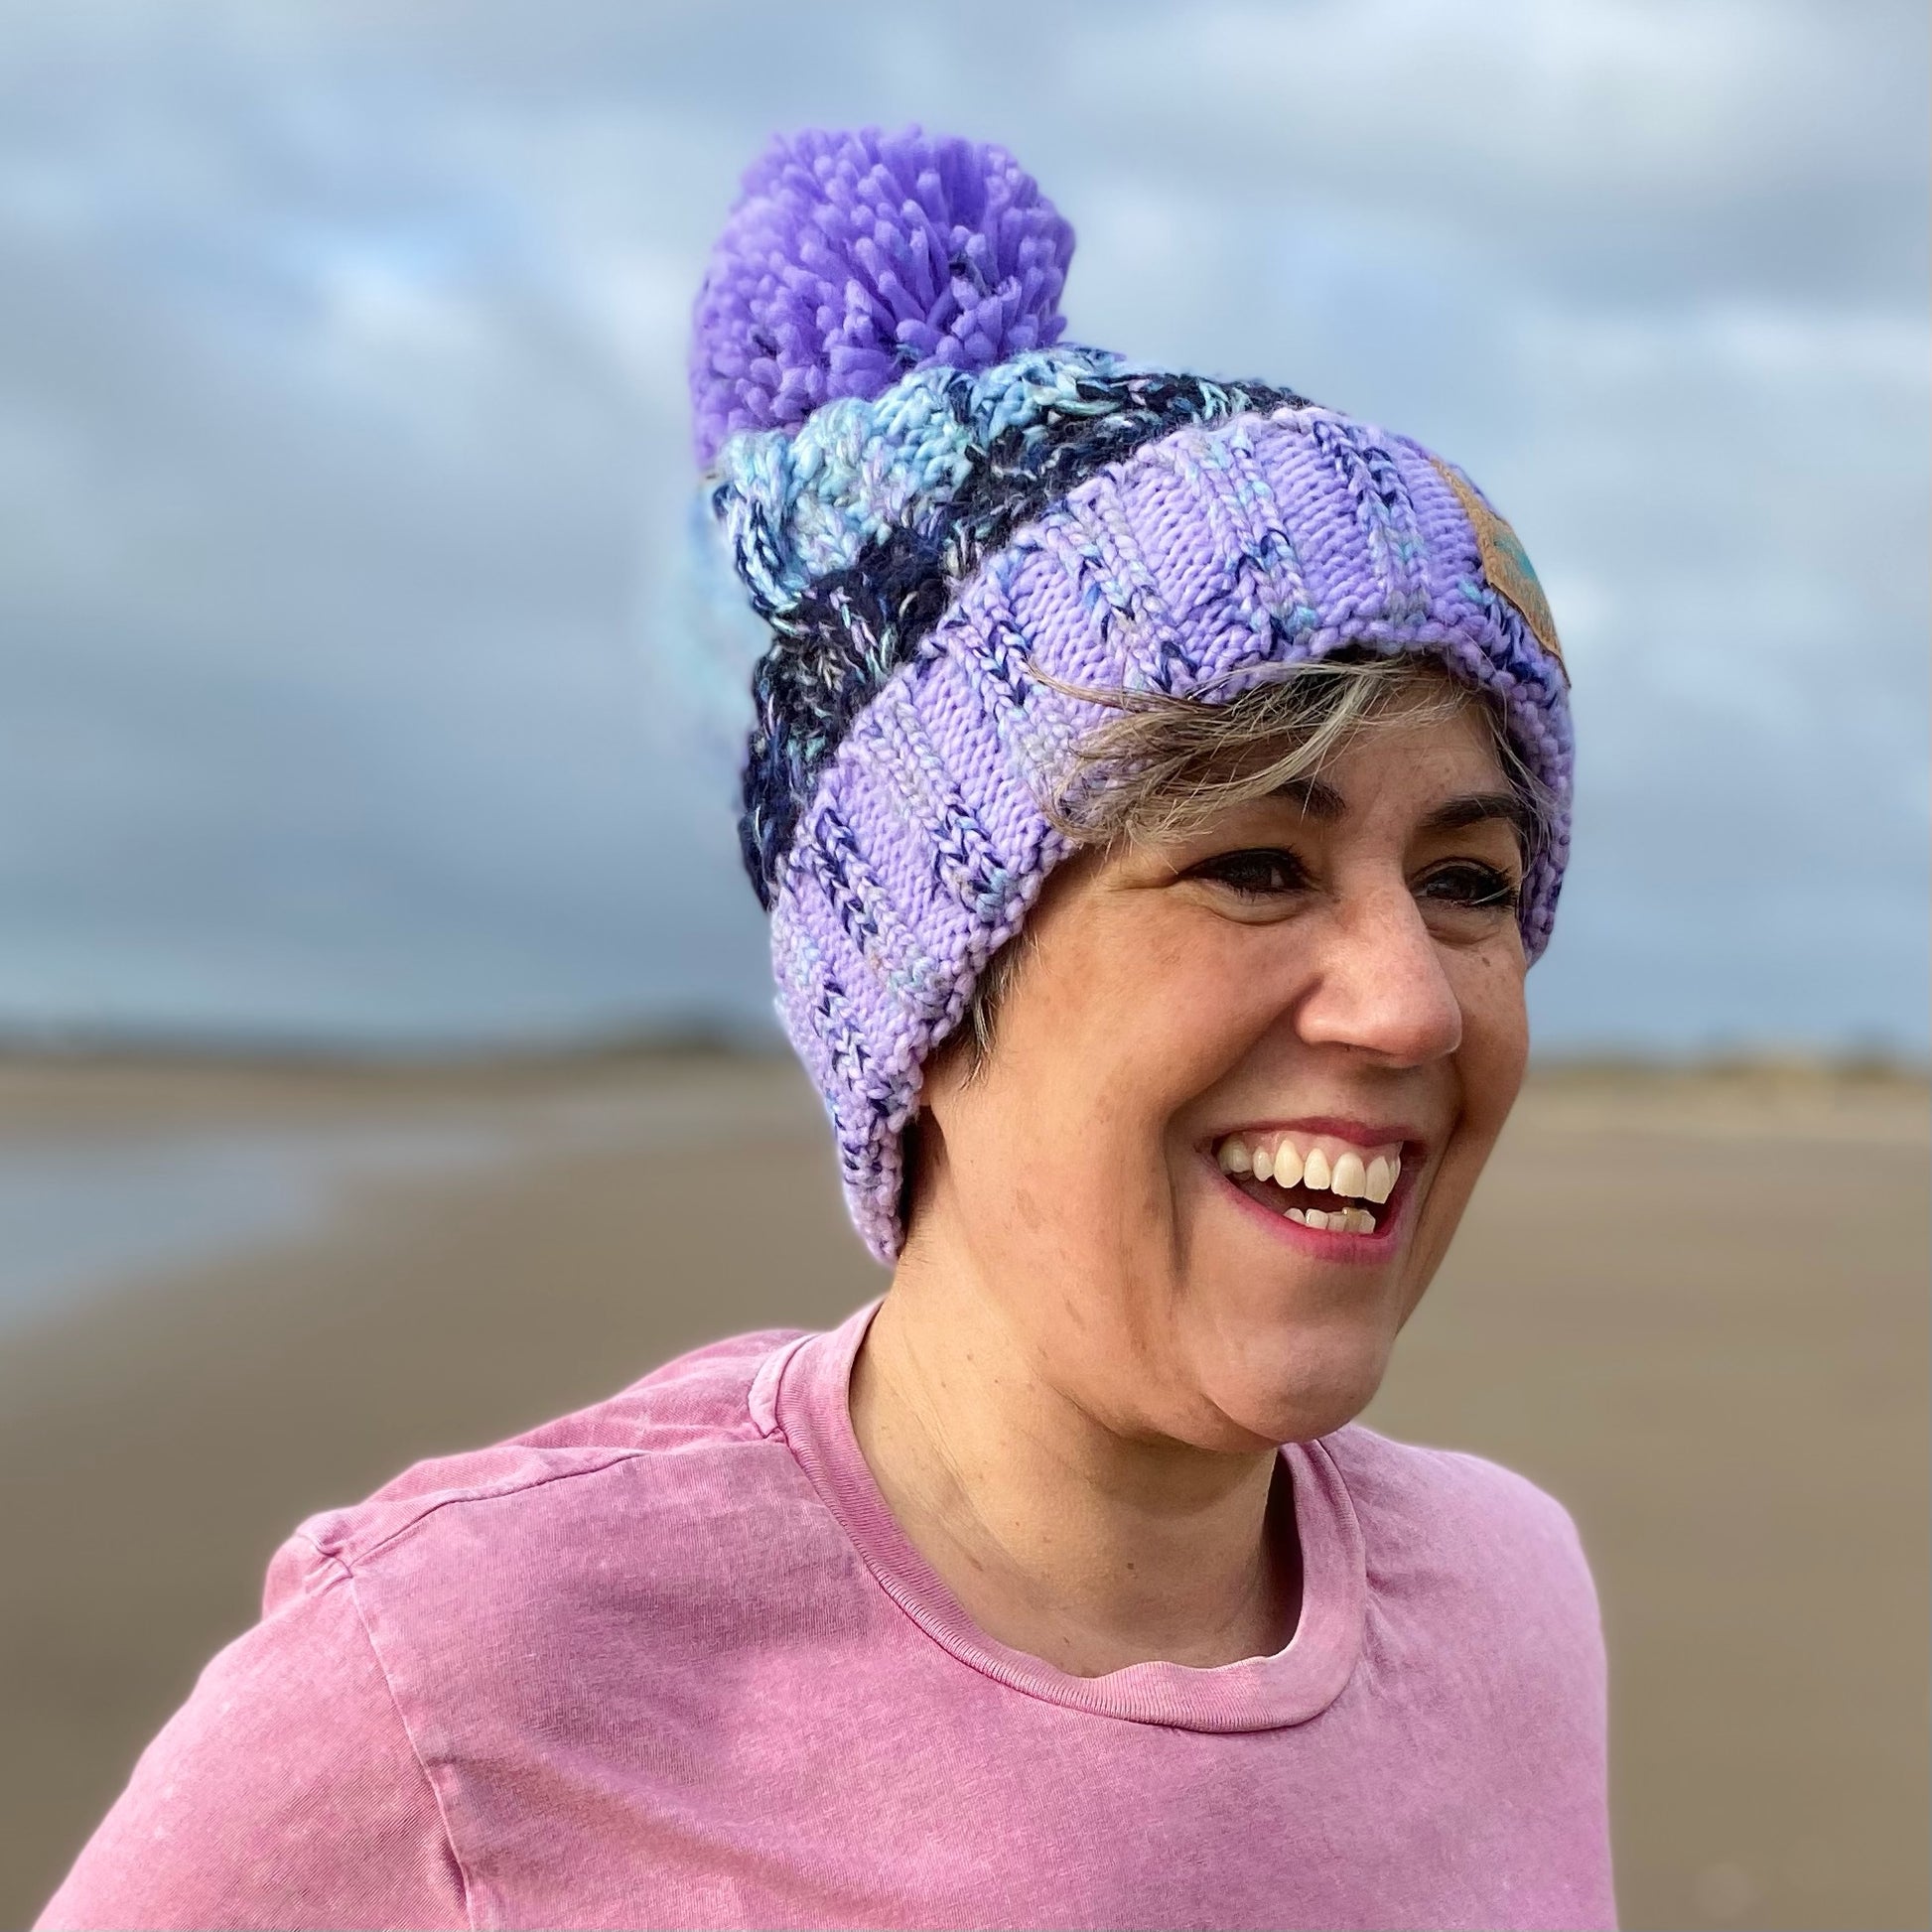 Woman wearing a lilac and blue knitted beanie hat with a pom pom.